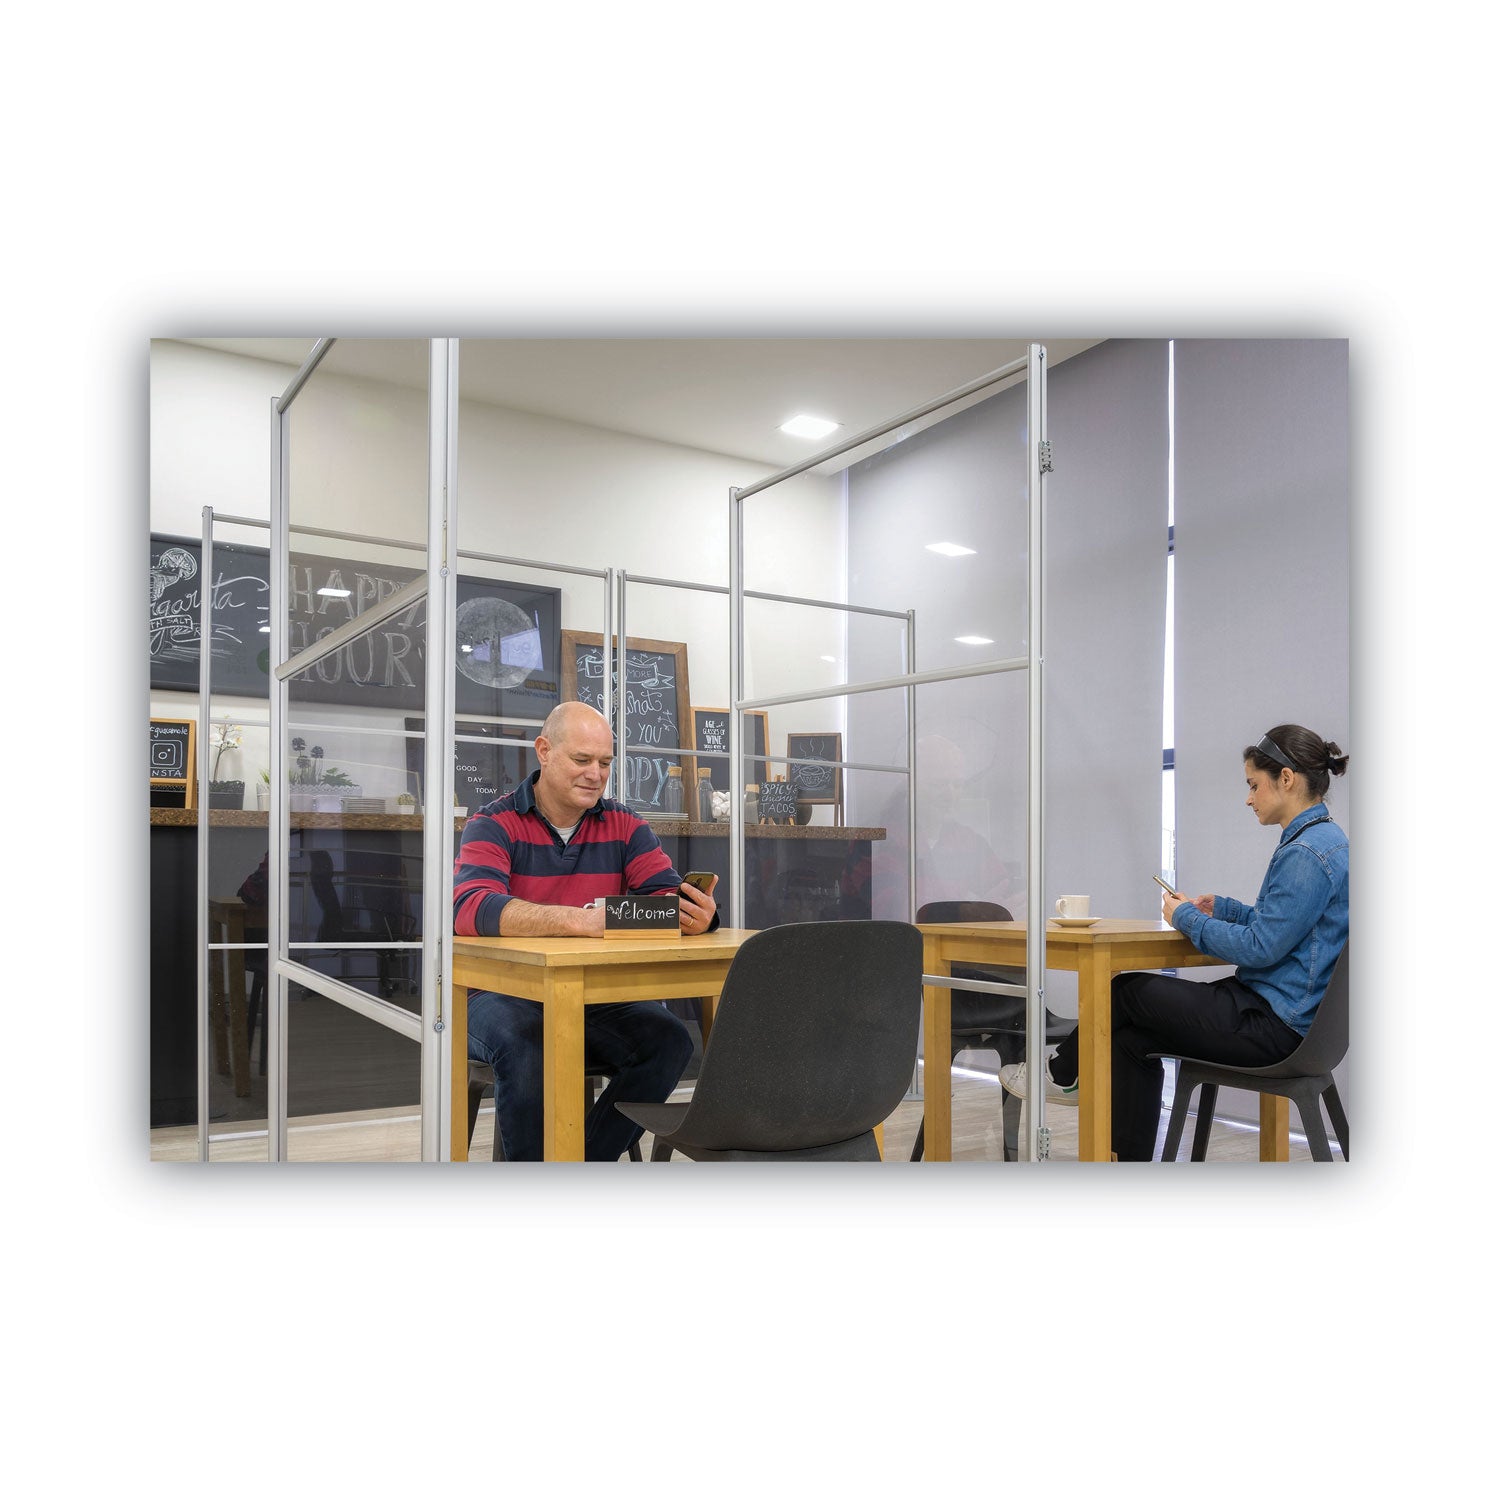 protector-series-mobile-glass-panel-divider-49-x-22-x-81-clear-aluminum_bvcdsp273046 - 8